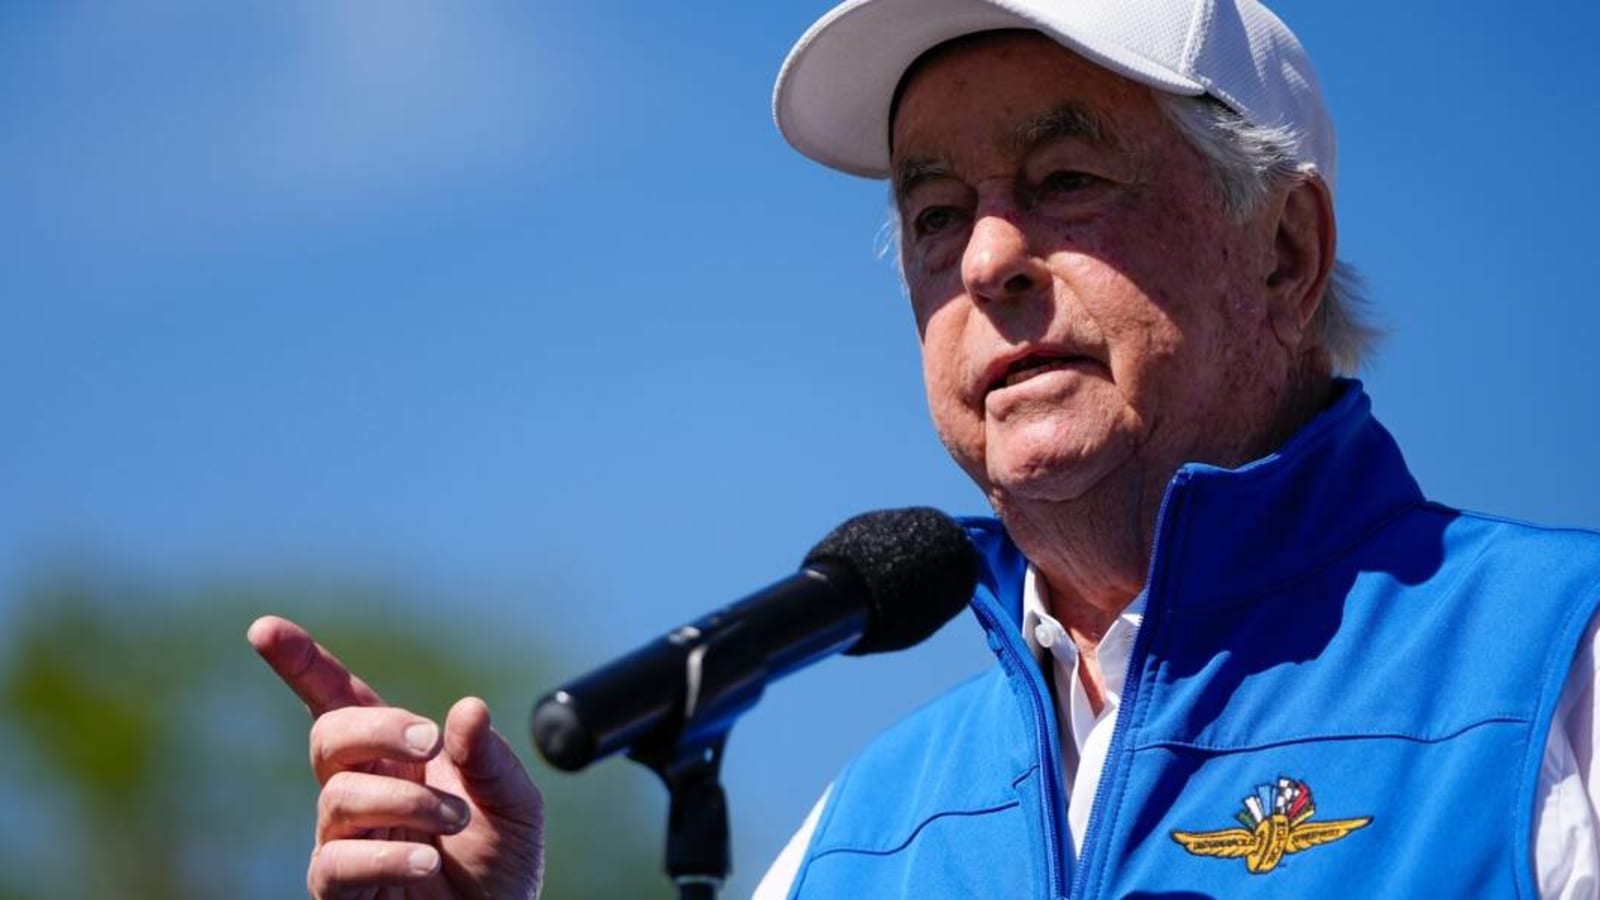 Roger Penske suspends Tim Cindric, three others in wake of IndyCar cheating scandal